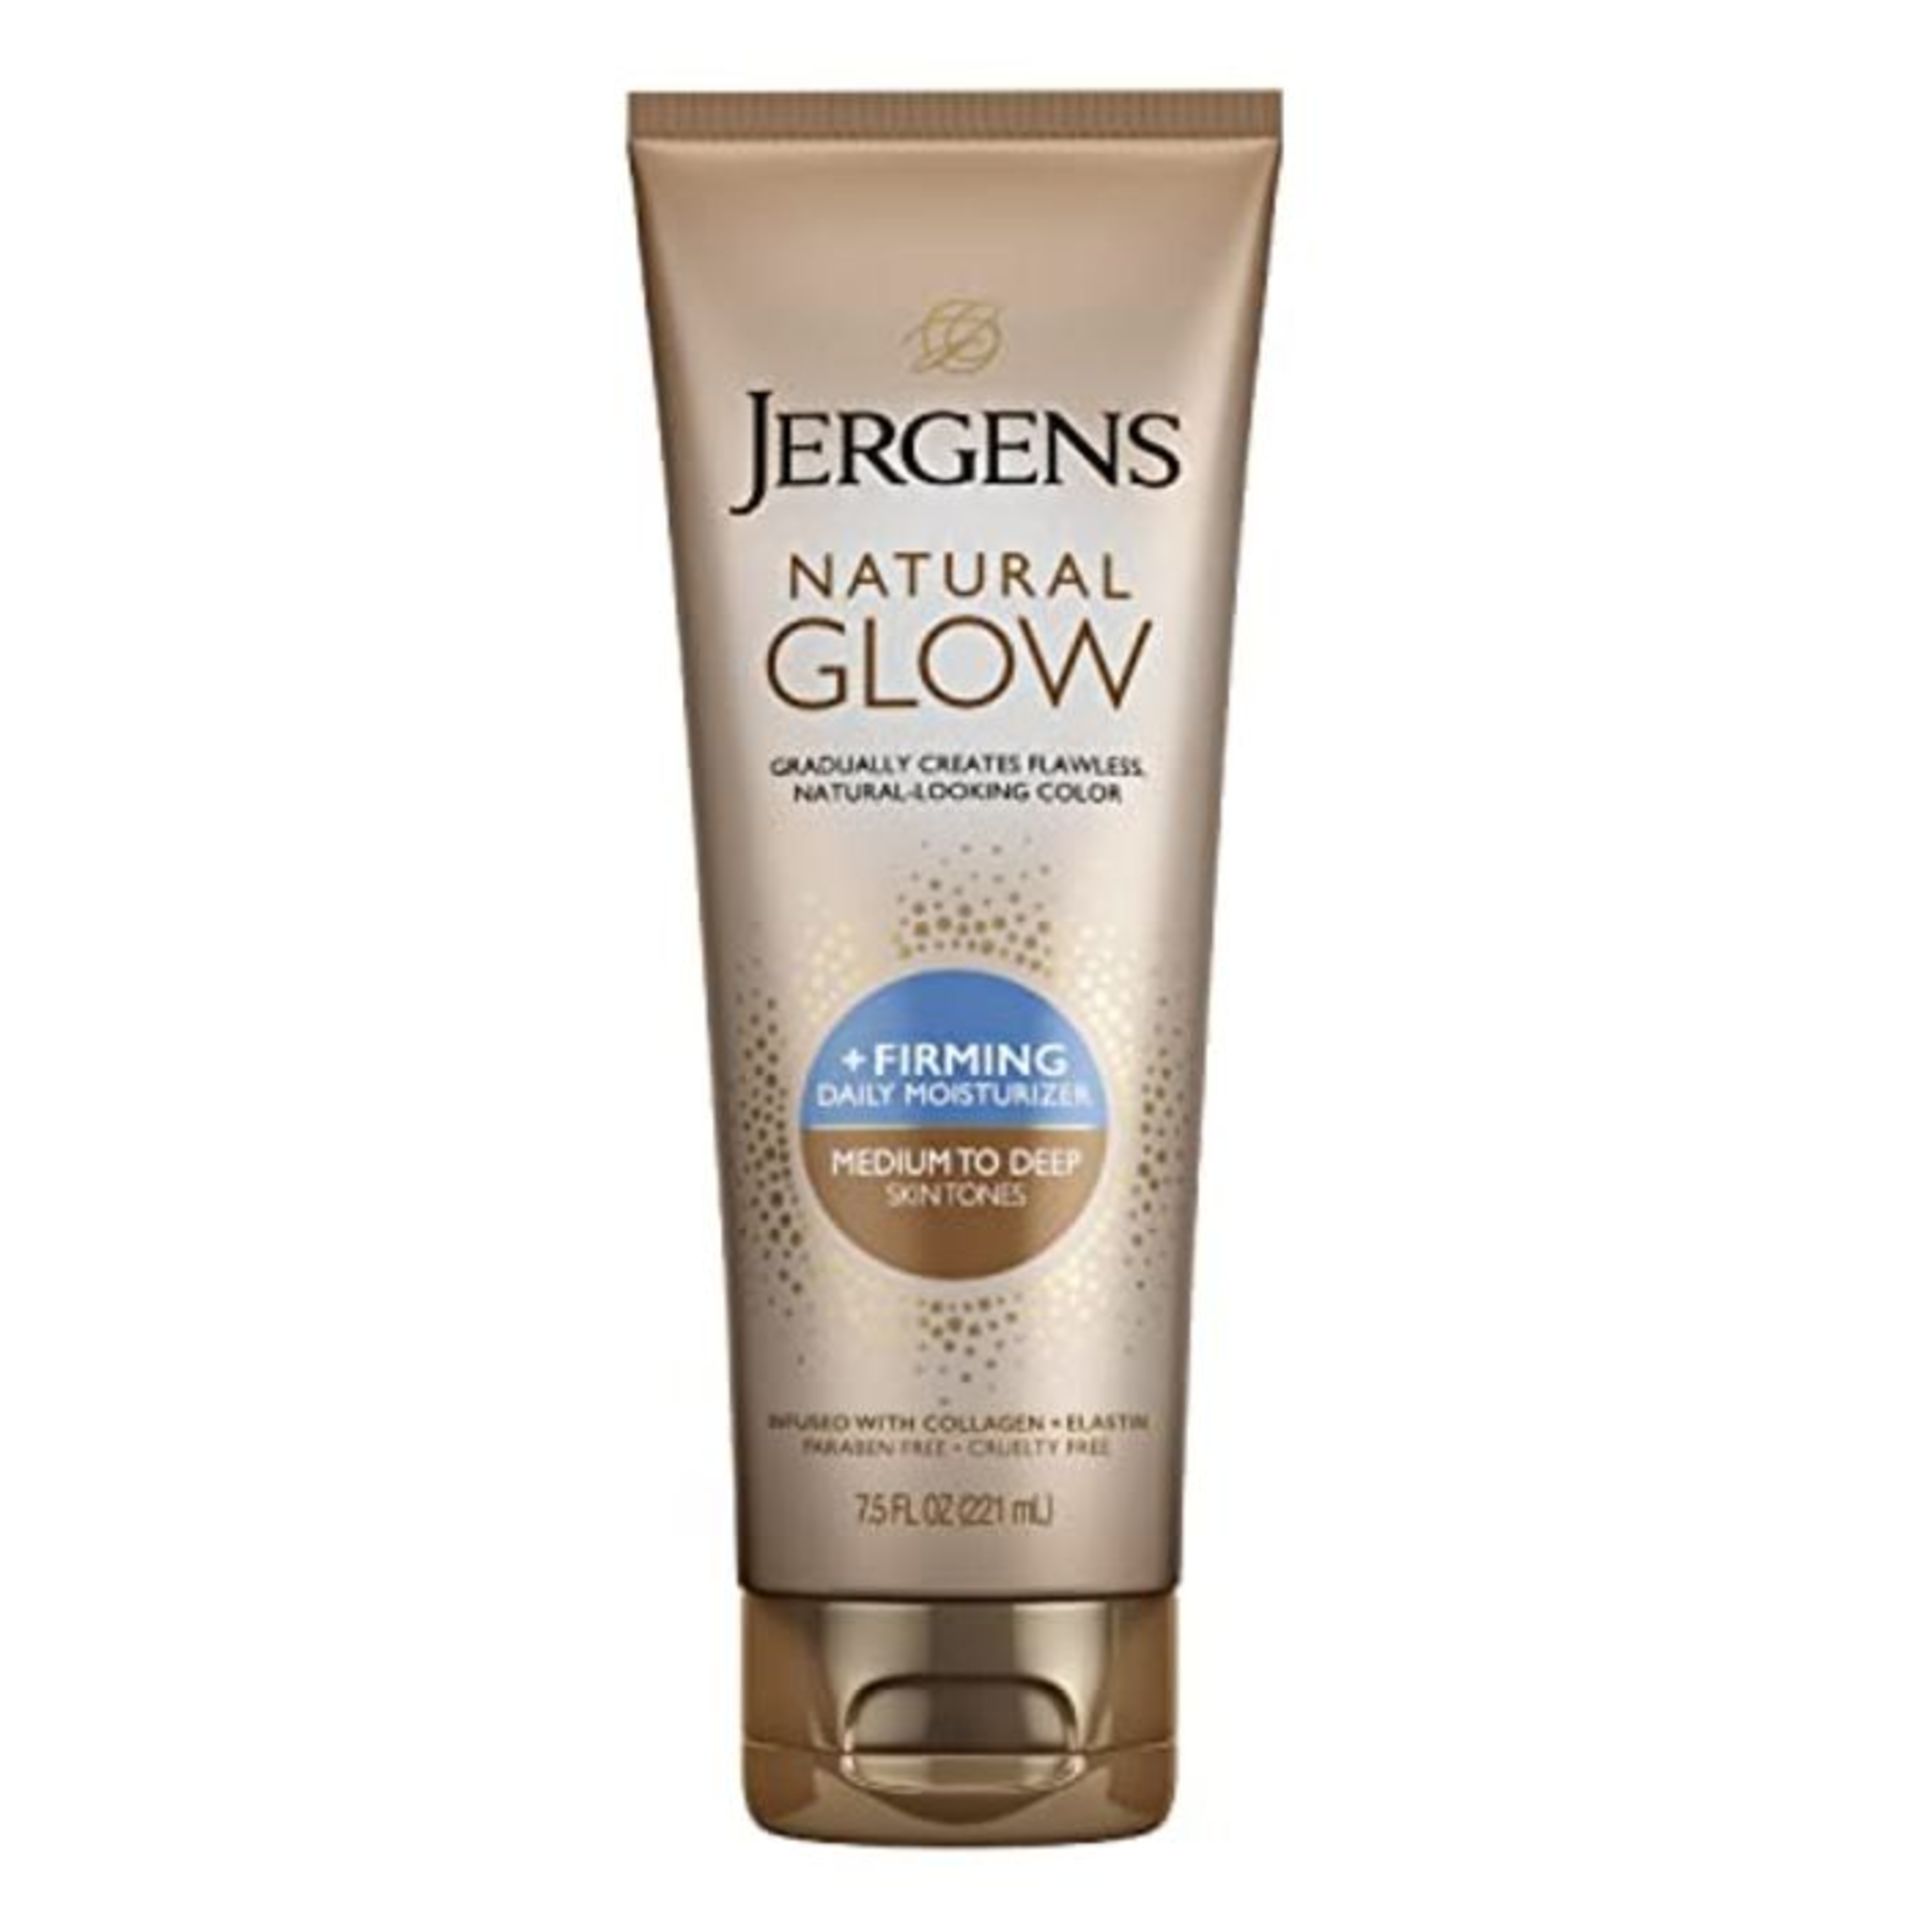 Jergens Natural Glow +FIRMING Daily Moisturizer for Body, Medium to Tan Skin Tones, 7.